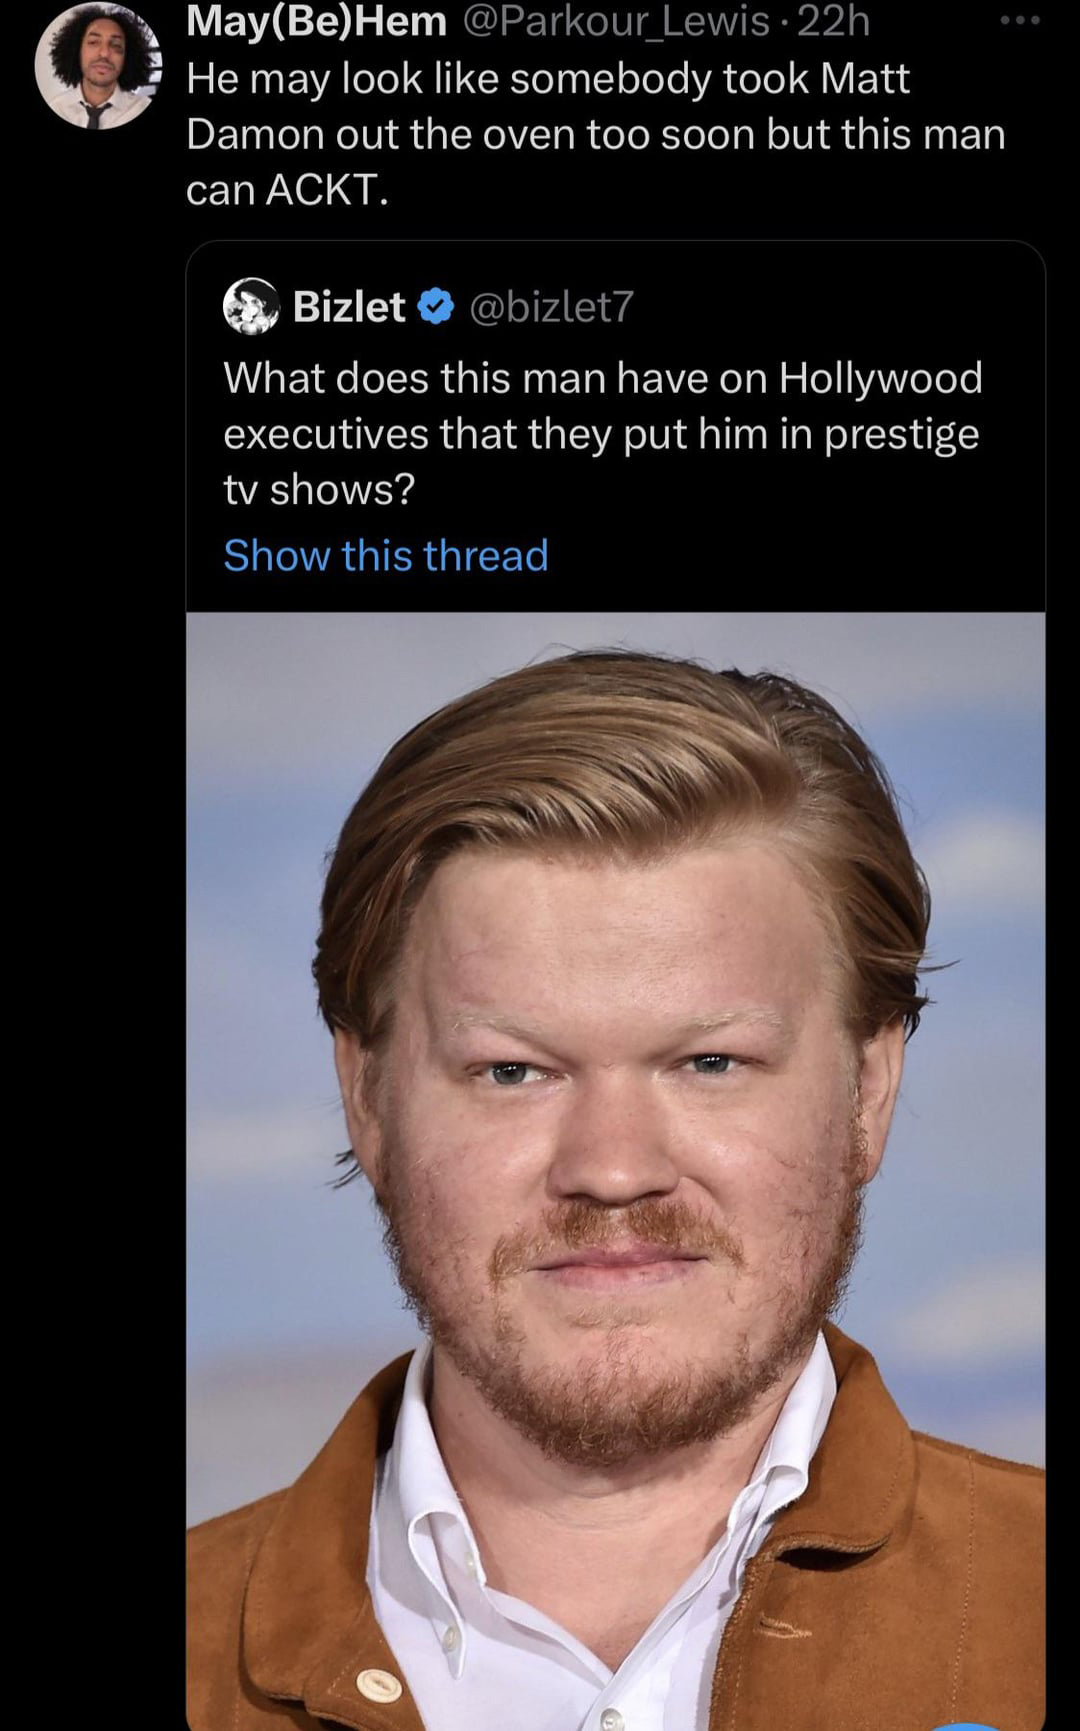 funny tweets and memes - jesse plemons - MayBeHem Lewis22h He may look somebody took Matt Damon out the oven too soon but this man can Ackt. Bizlet What does this man have on Hollywood executives that they put him in prestige tv shows? Show this thread